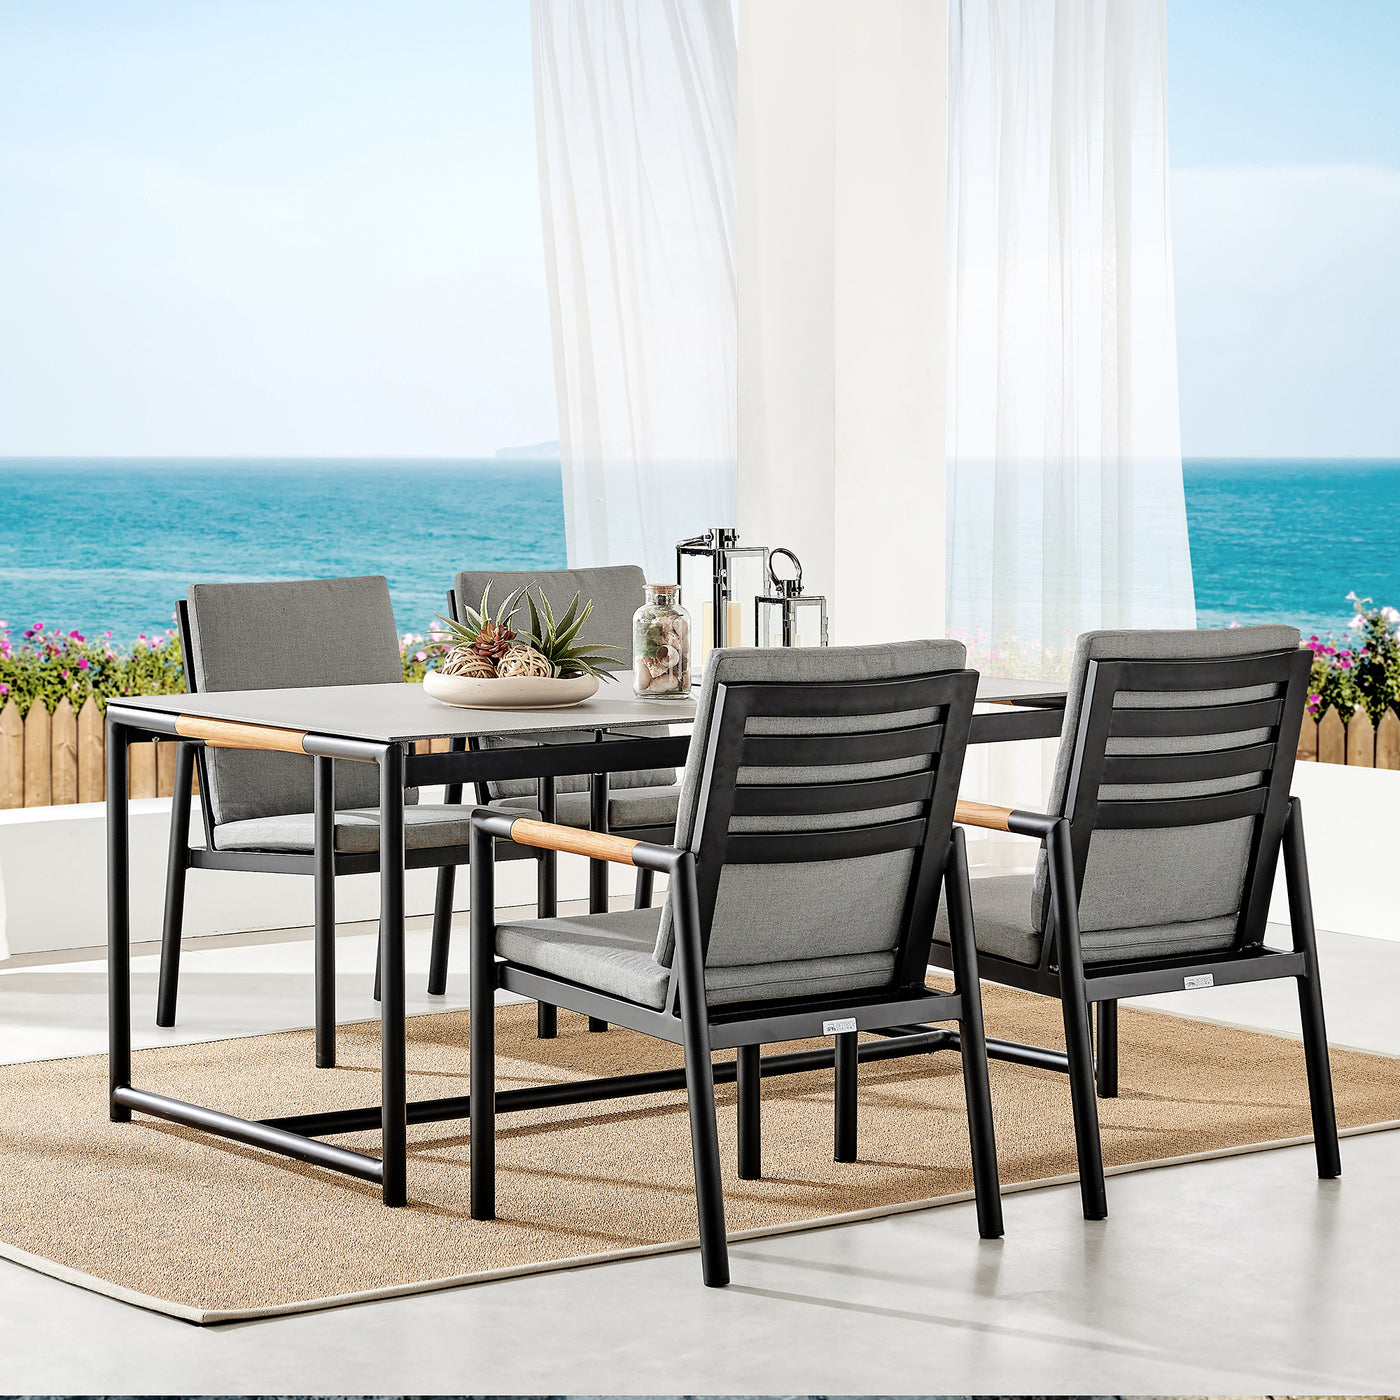 Crown Outdoor Dining Set